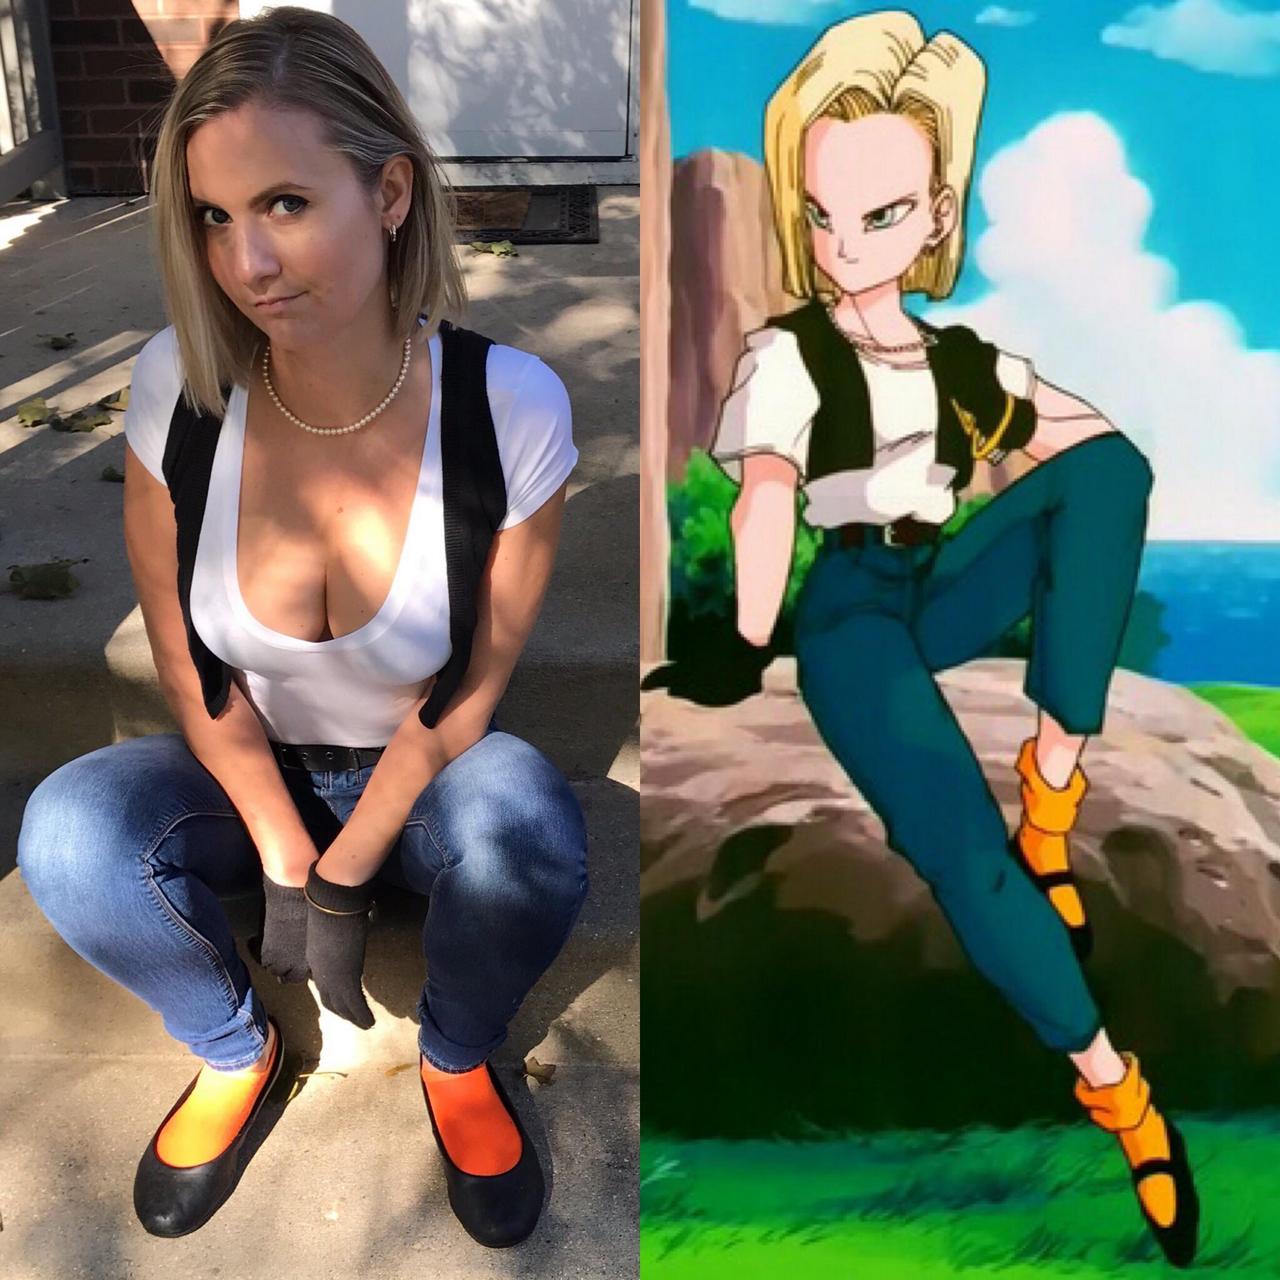 Android 18 Cosplayer Vs Character Paige Parke